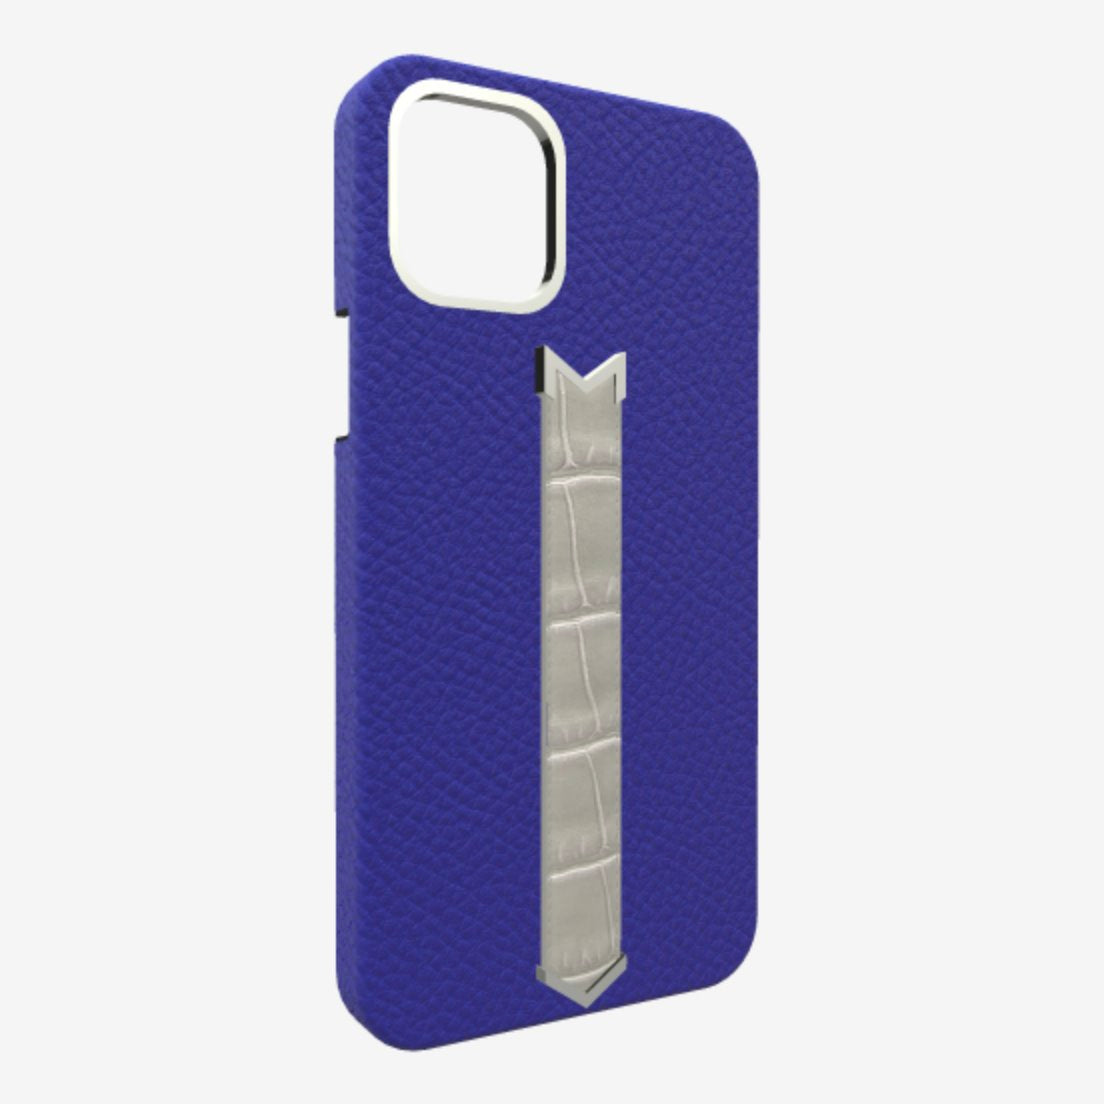 Silver Finger Strap Case for iPhone 13 in Genuine Calfskin and Alligator Electric-Blue Pearl-Grey 